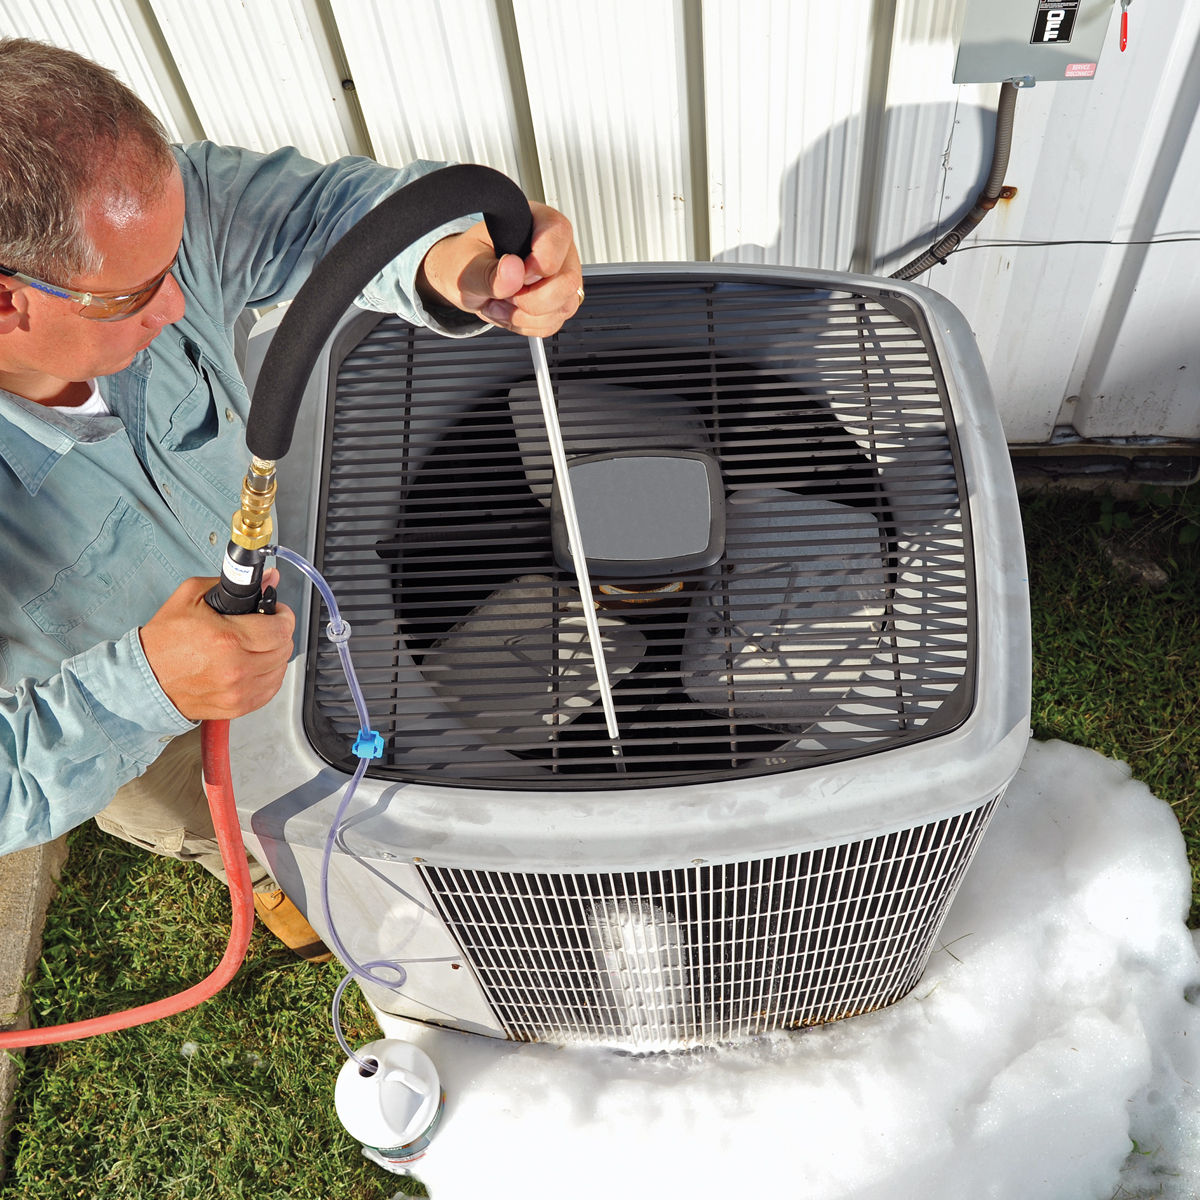 playgroundwebdesign How To Clean Air Conditioner Coils